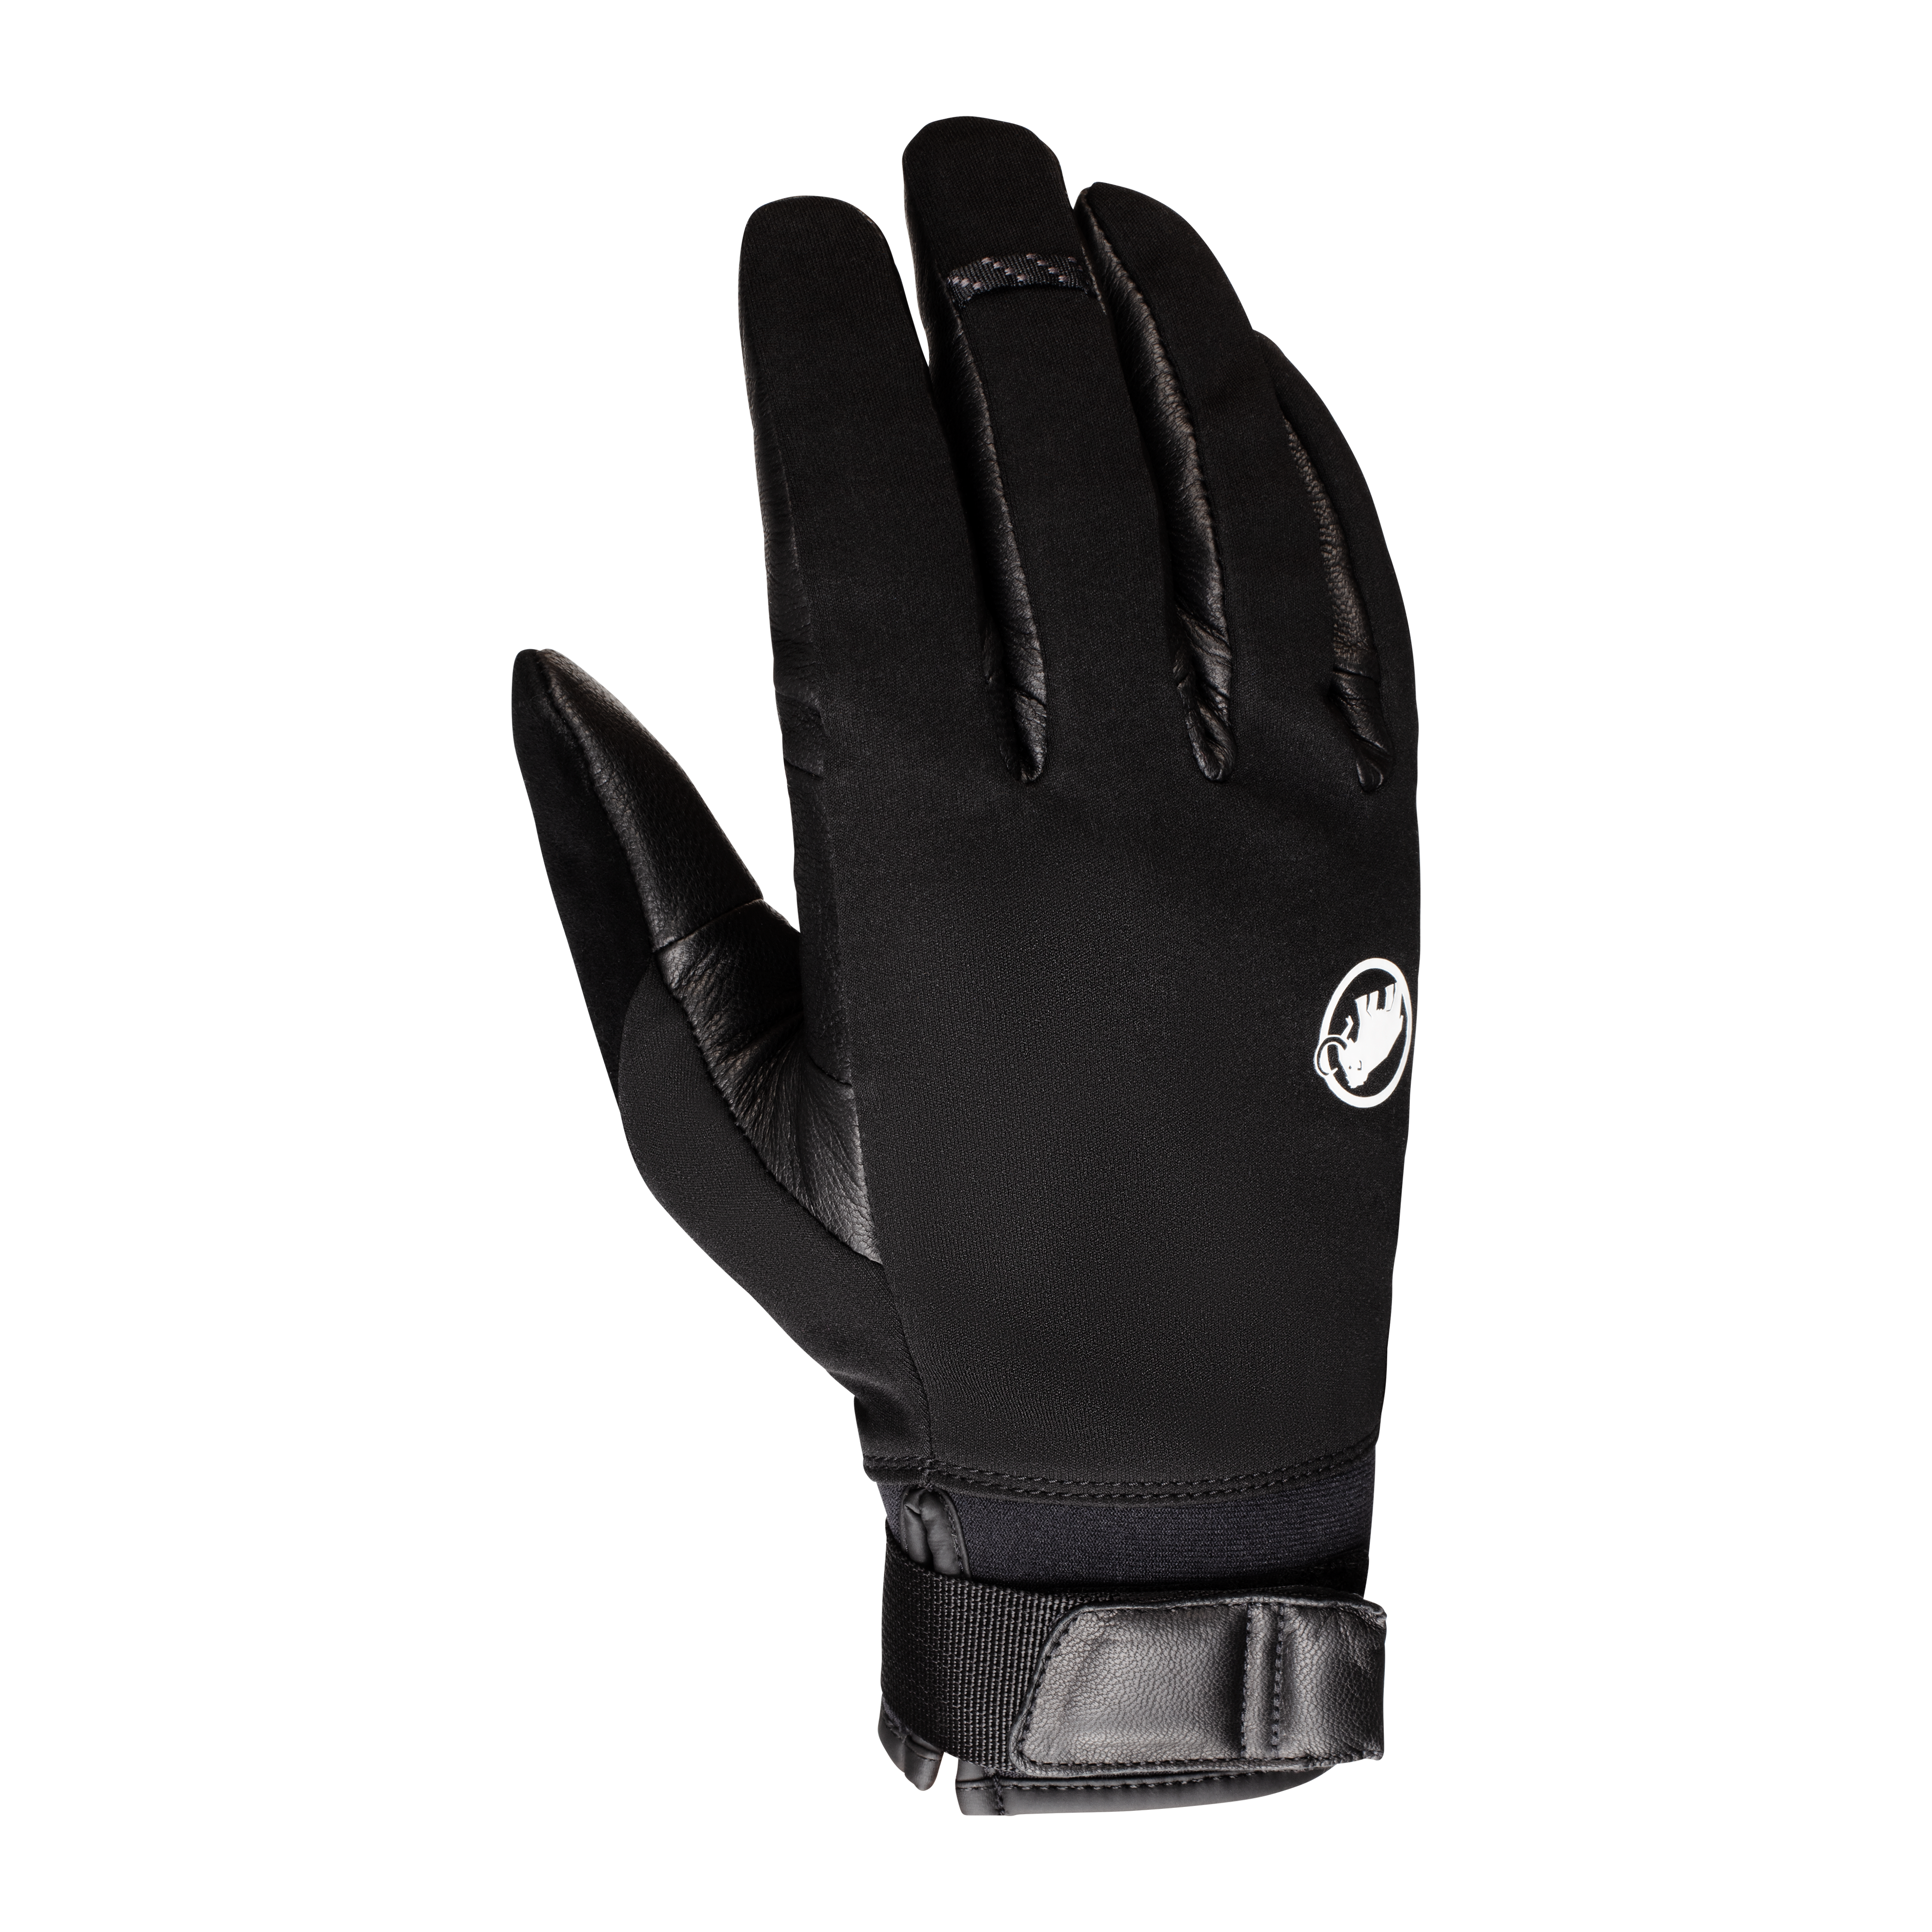 Astro Guide Glove product image